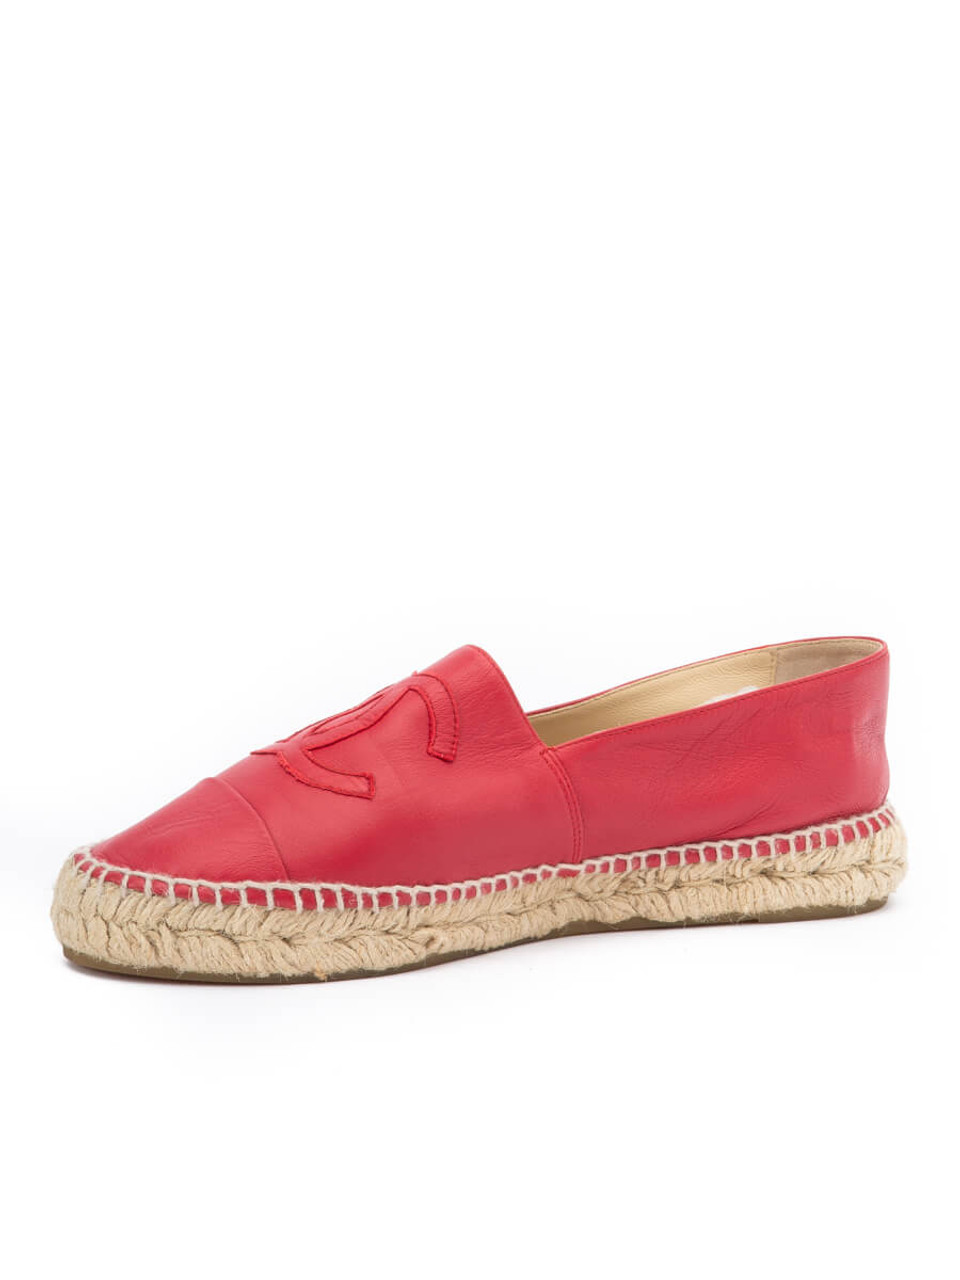 Chanel Women's Espadrille, Size 9 UK, Red Leather